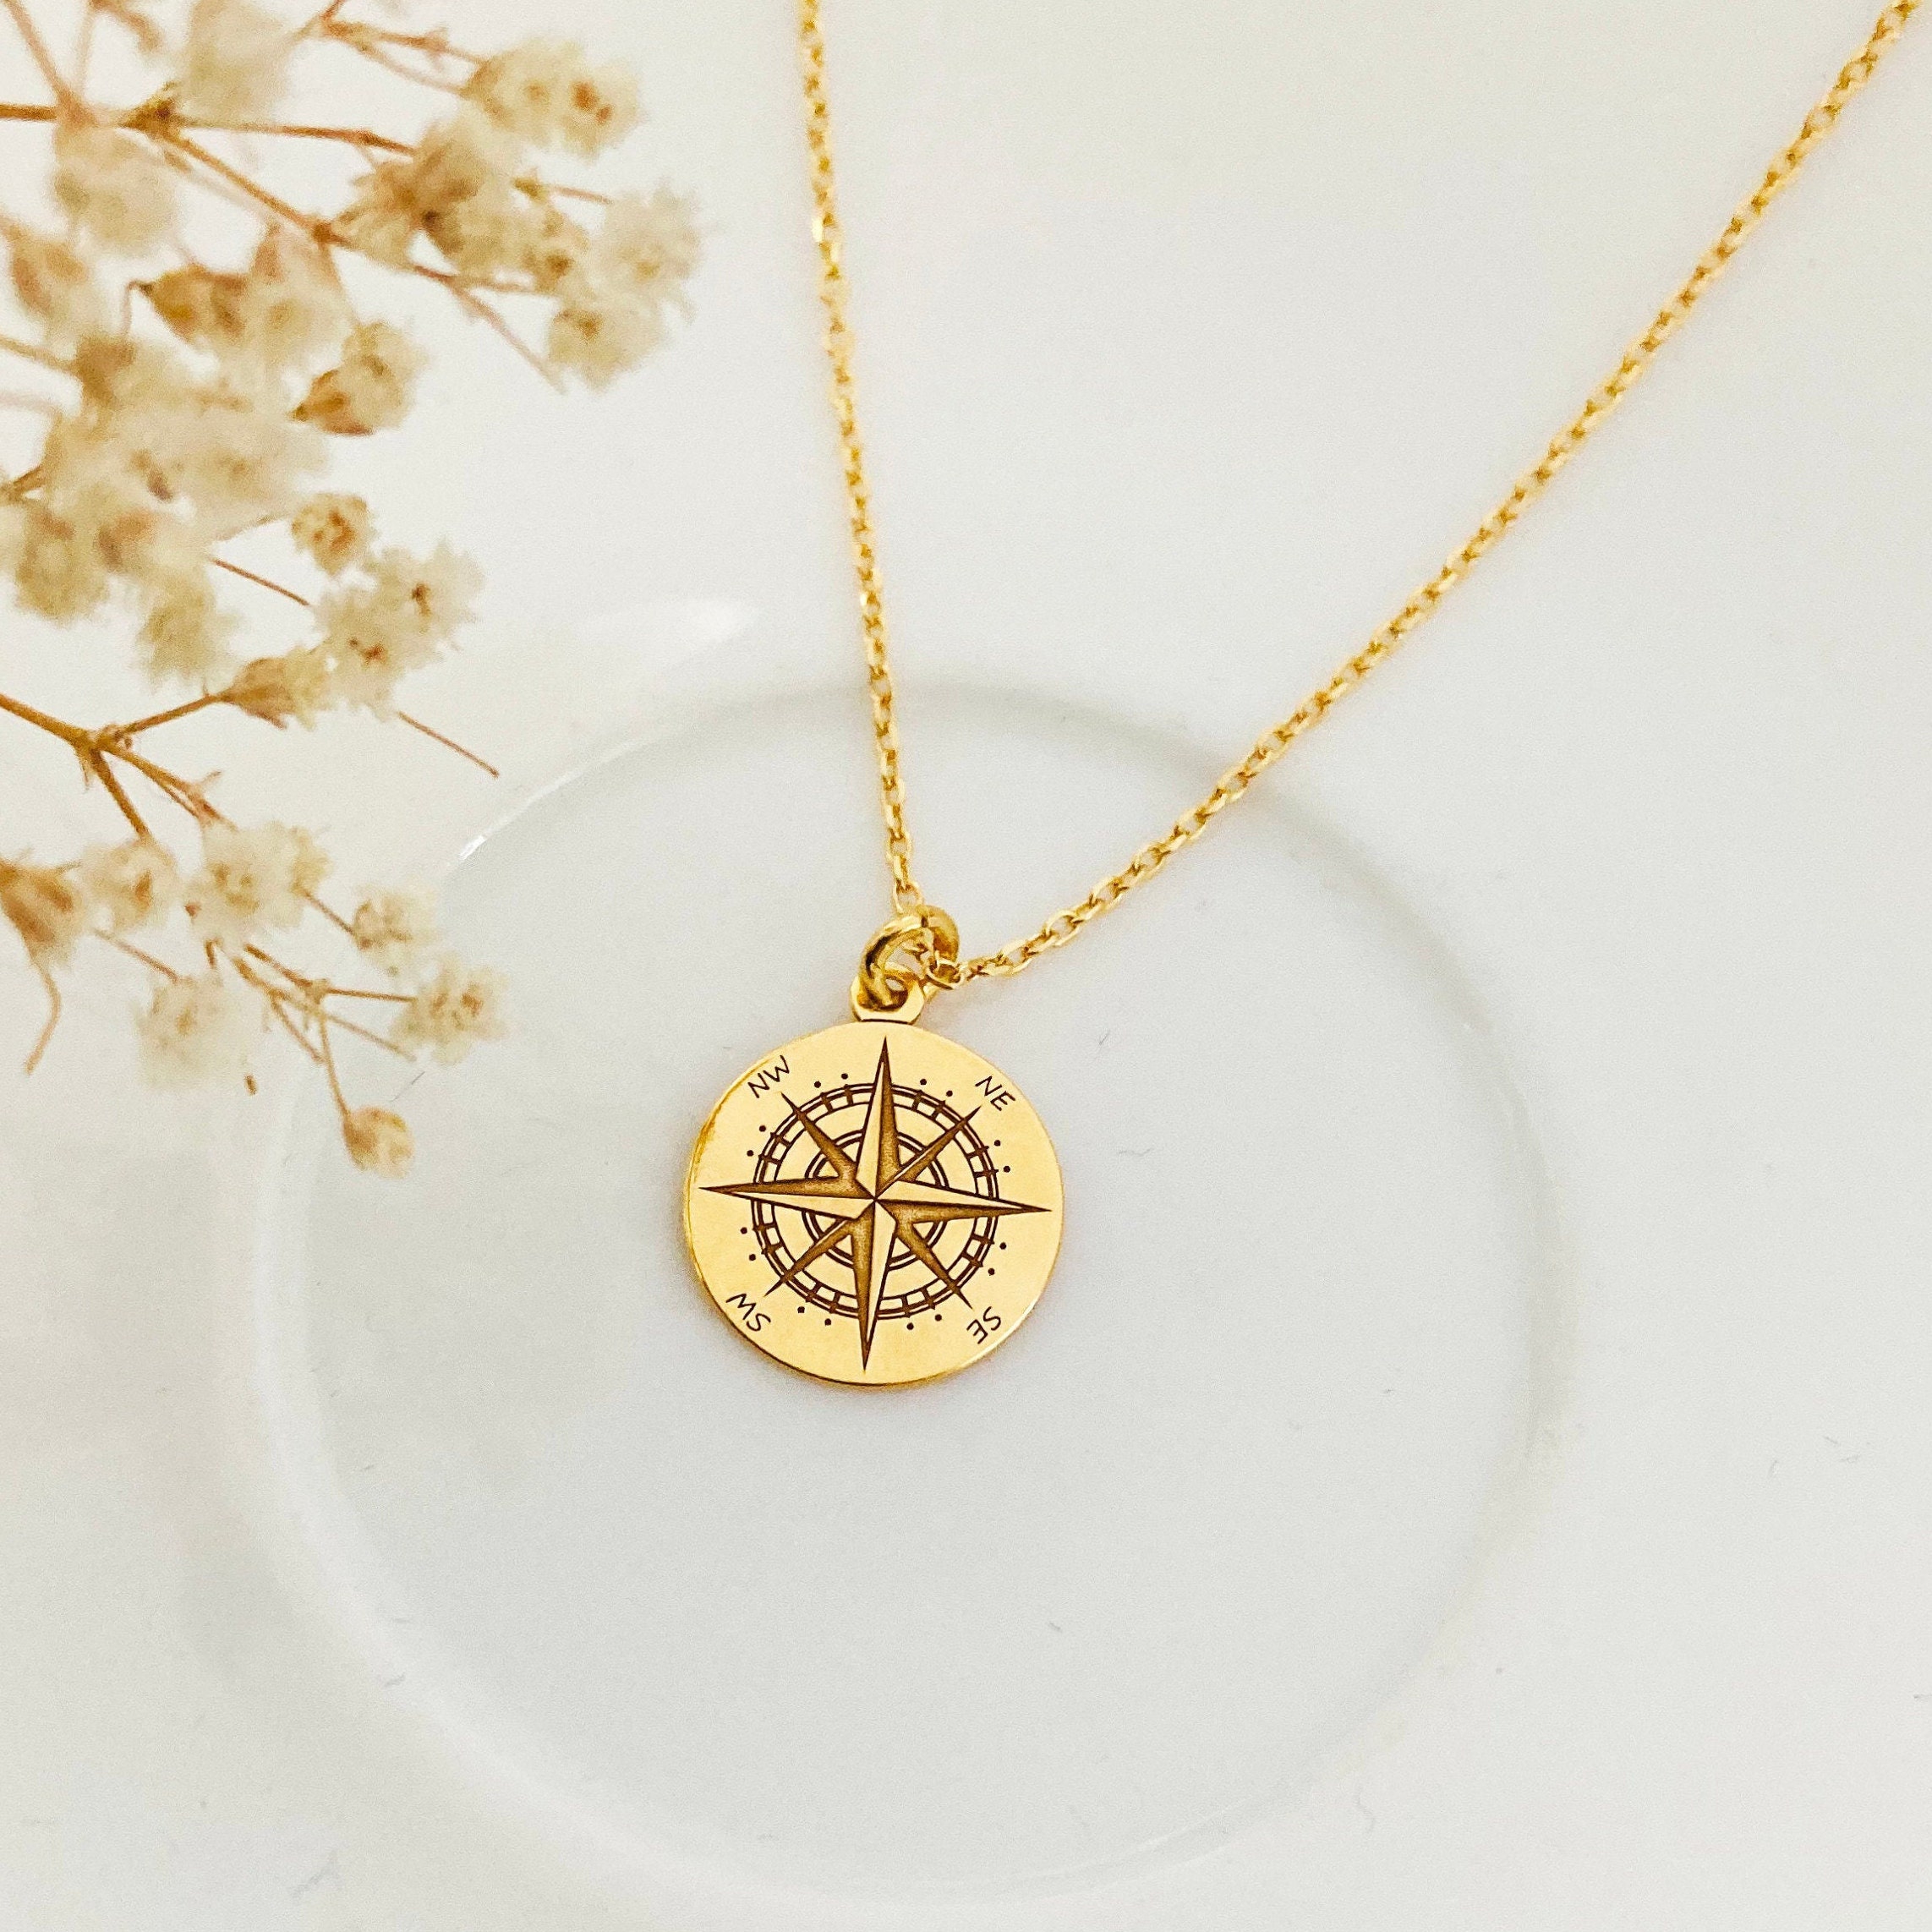 Christmas Gift for Best Friend NecklaceBest Personalized Xmas Gifts, Holiday Presents, Compass / Rose Gold